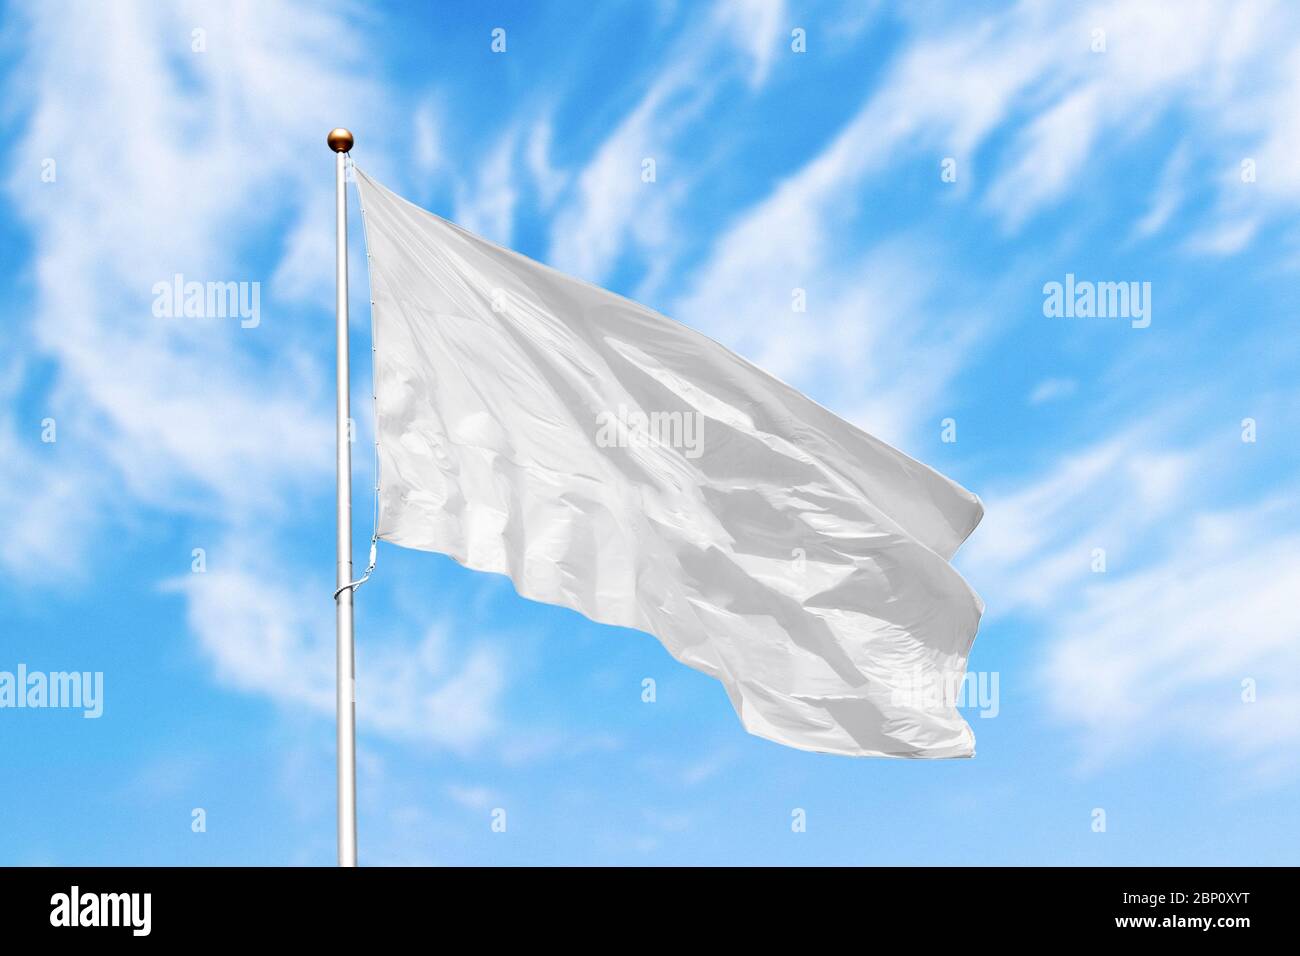 Blank white flag on pole waving in the wind in the background of cloudy sky. Colorful outdoor picture with empty flag mockup Stock Photo